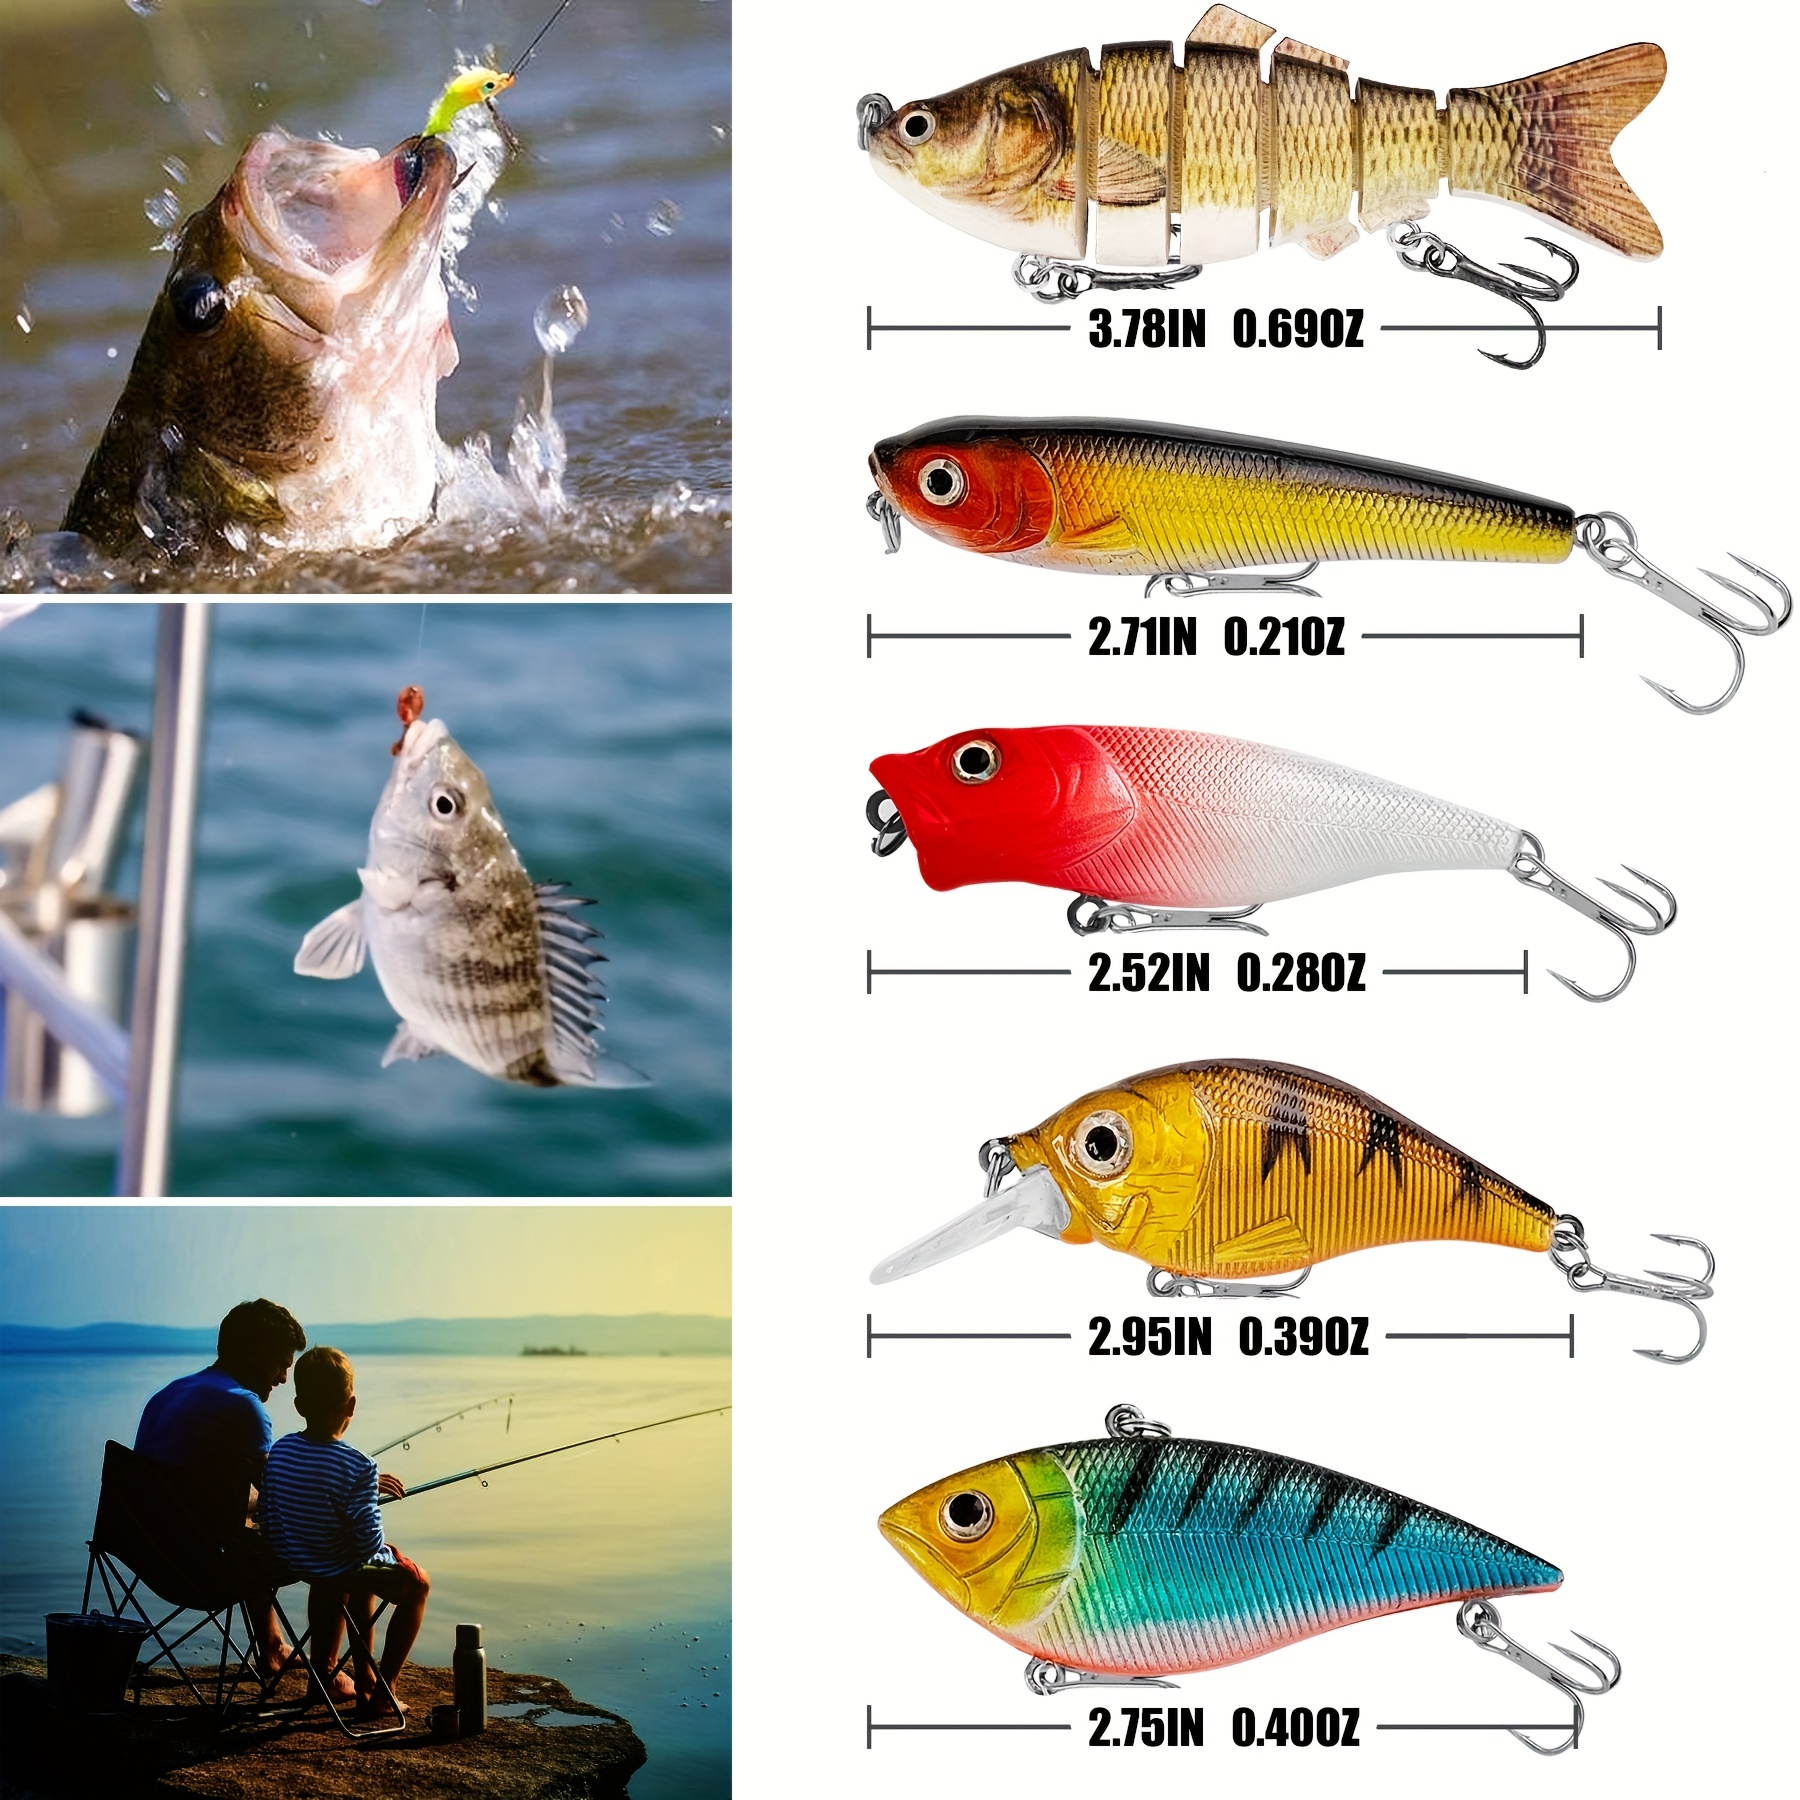 193pcs Complete Fishing Lure Kit - Includes Crankbaits, Spinnerbaits, Jig  Hooks, Minnow Vib, Plastic Worms, Topwater Lures, Tackle Box and Accessories